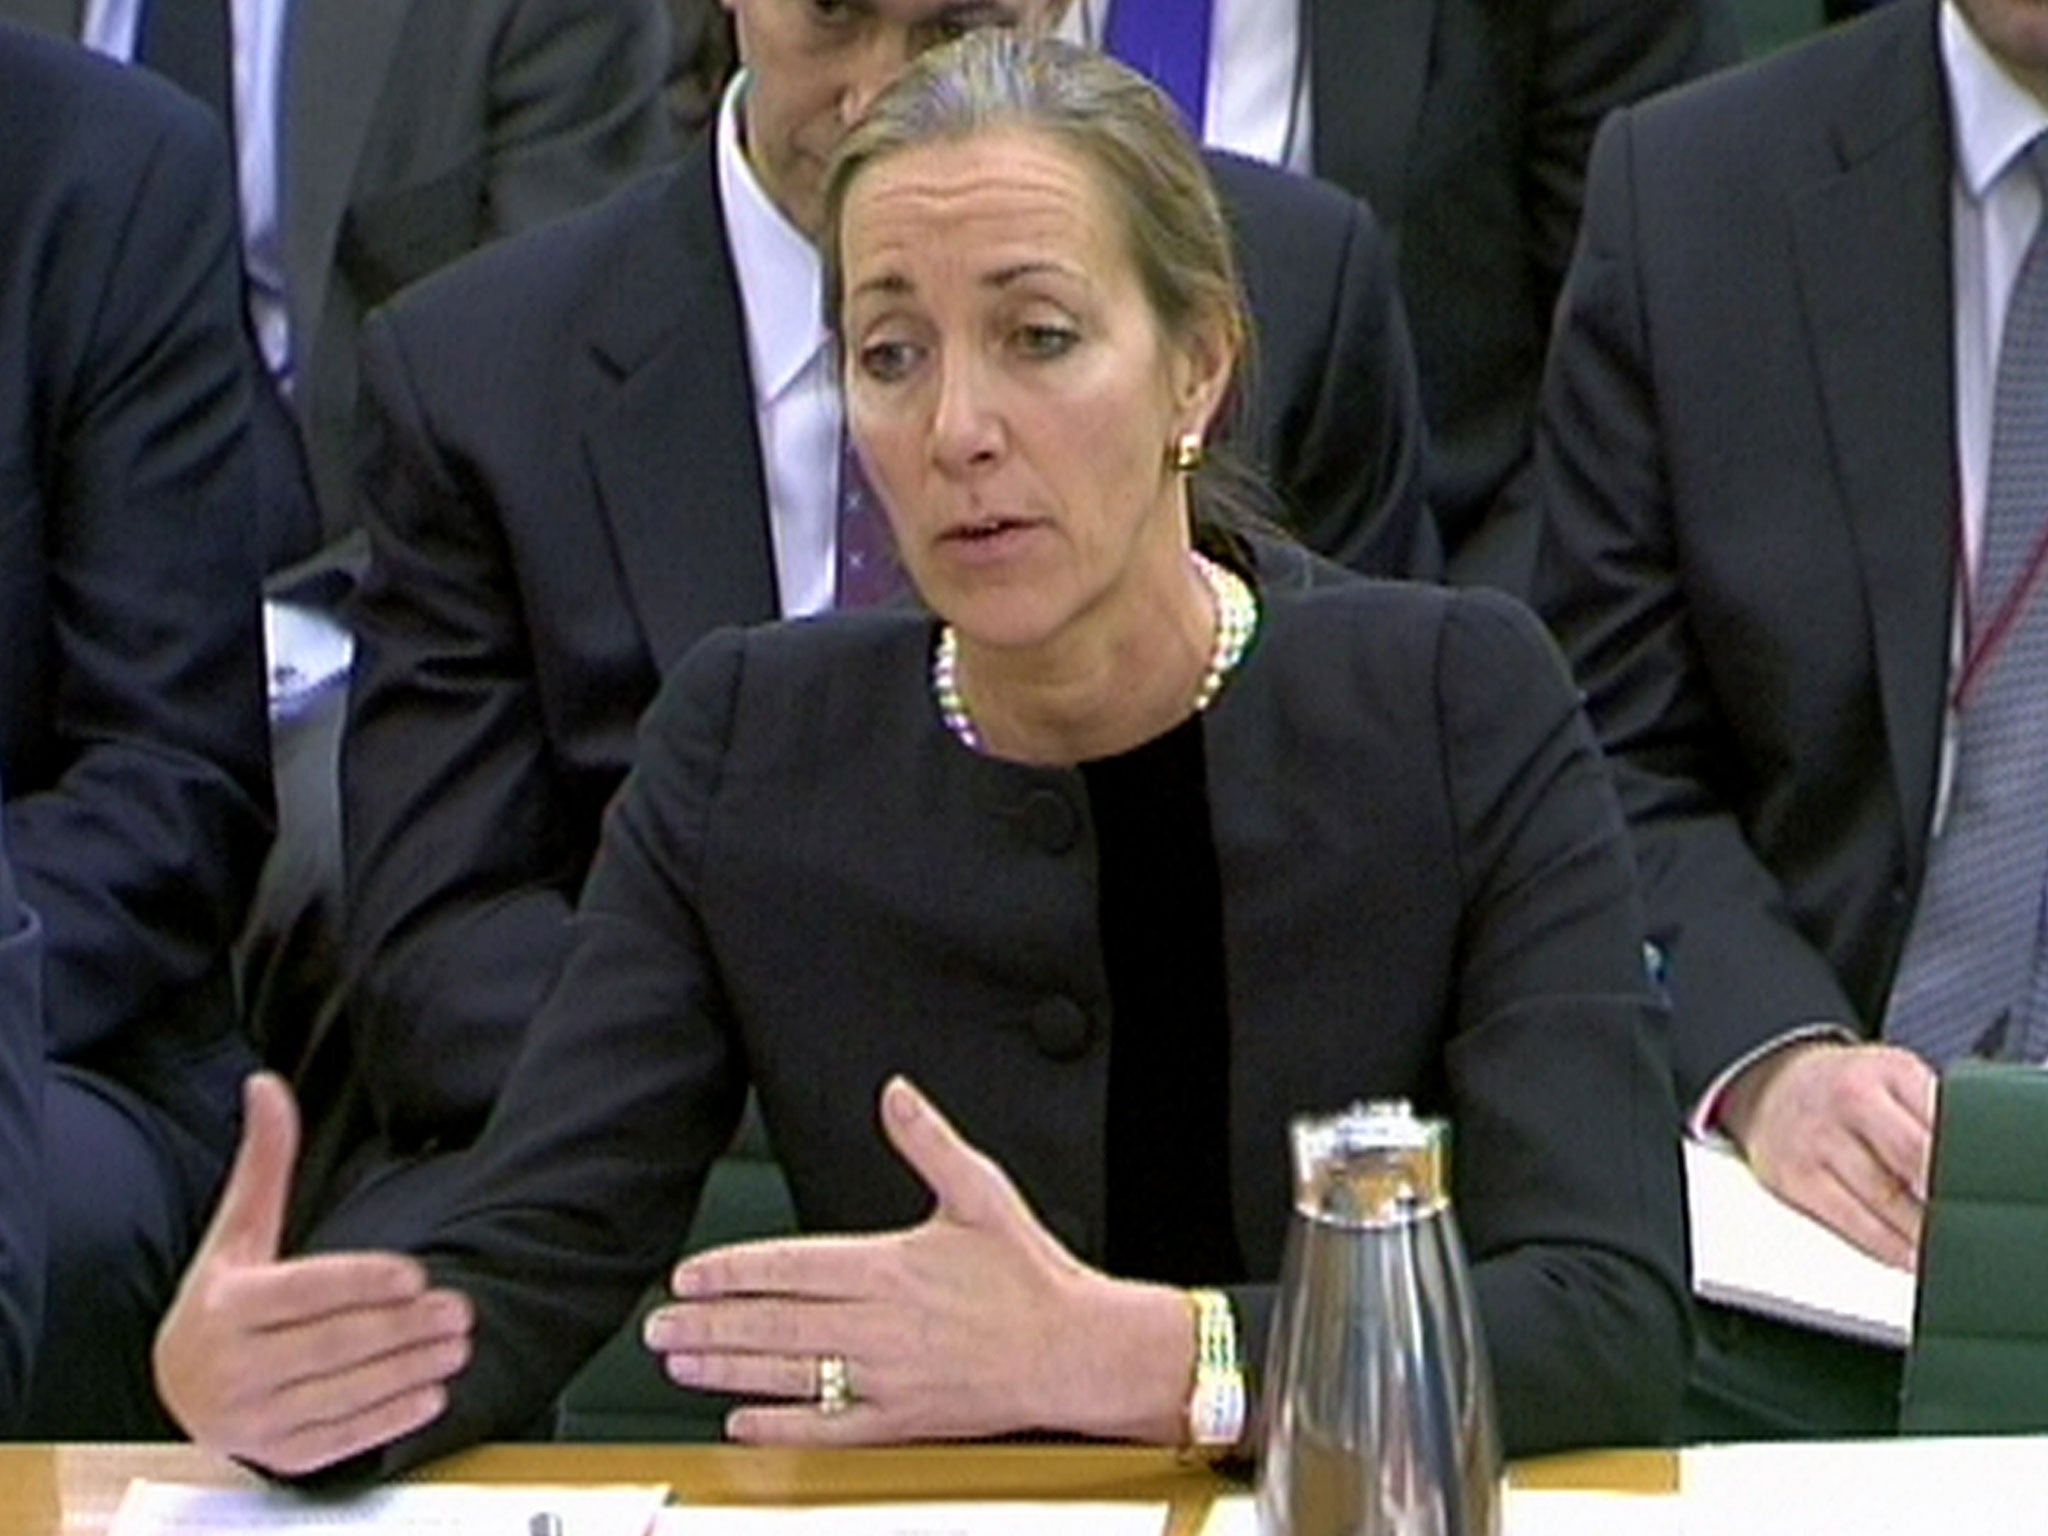 Rona Fairhead works the equivalent of one day a week at HSBC, where she earns £500,000 a year